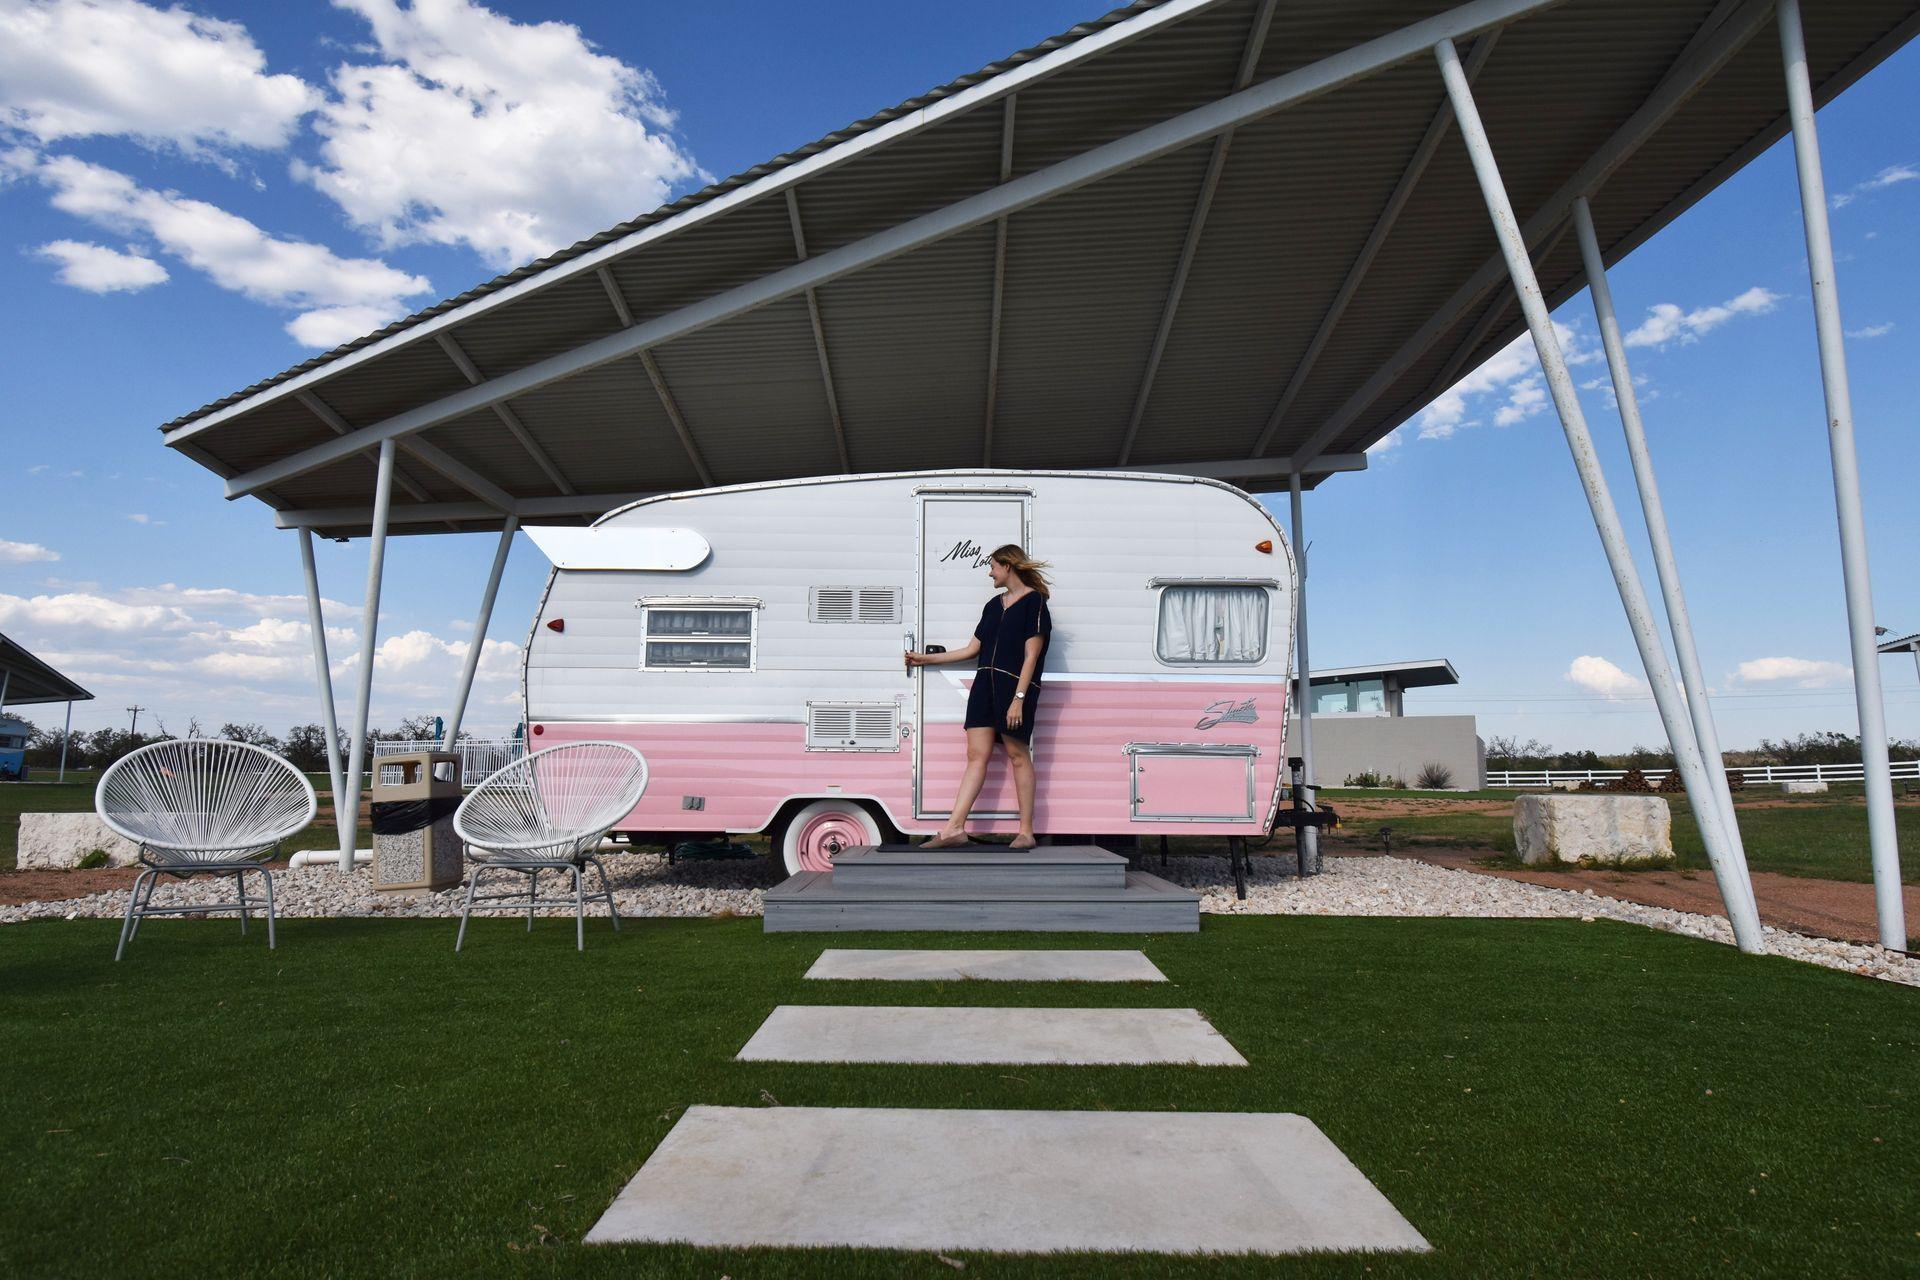 Lydia standing in front a pink and white trailer at Blue Skies Retro Resort.